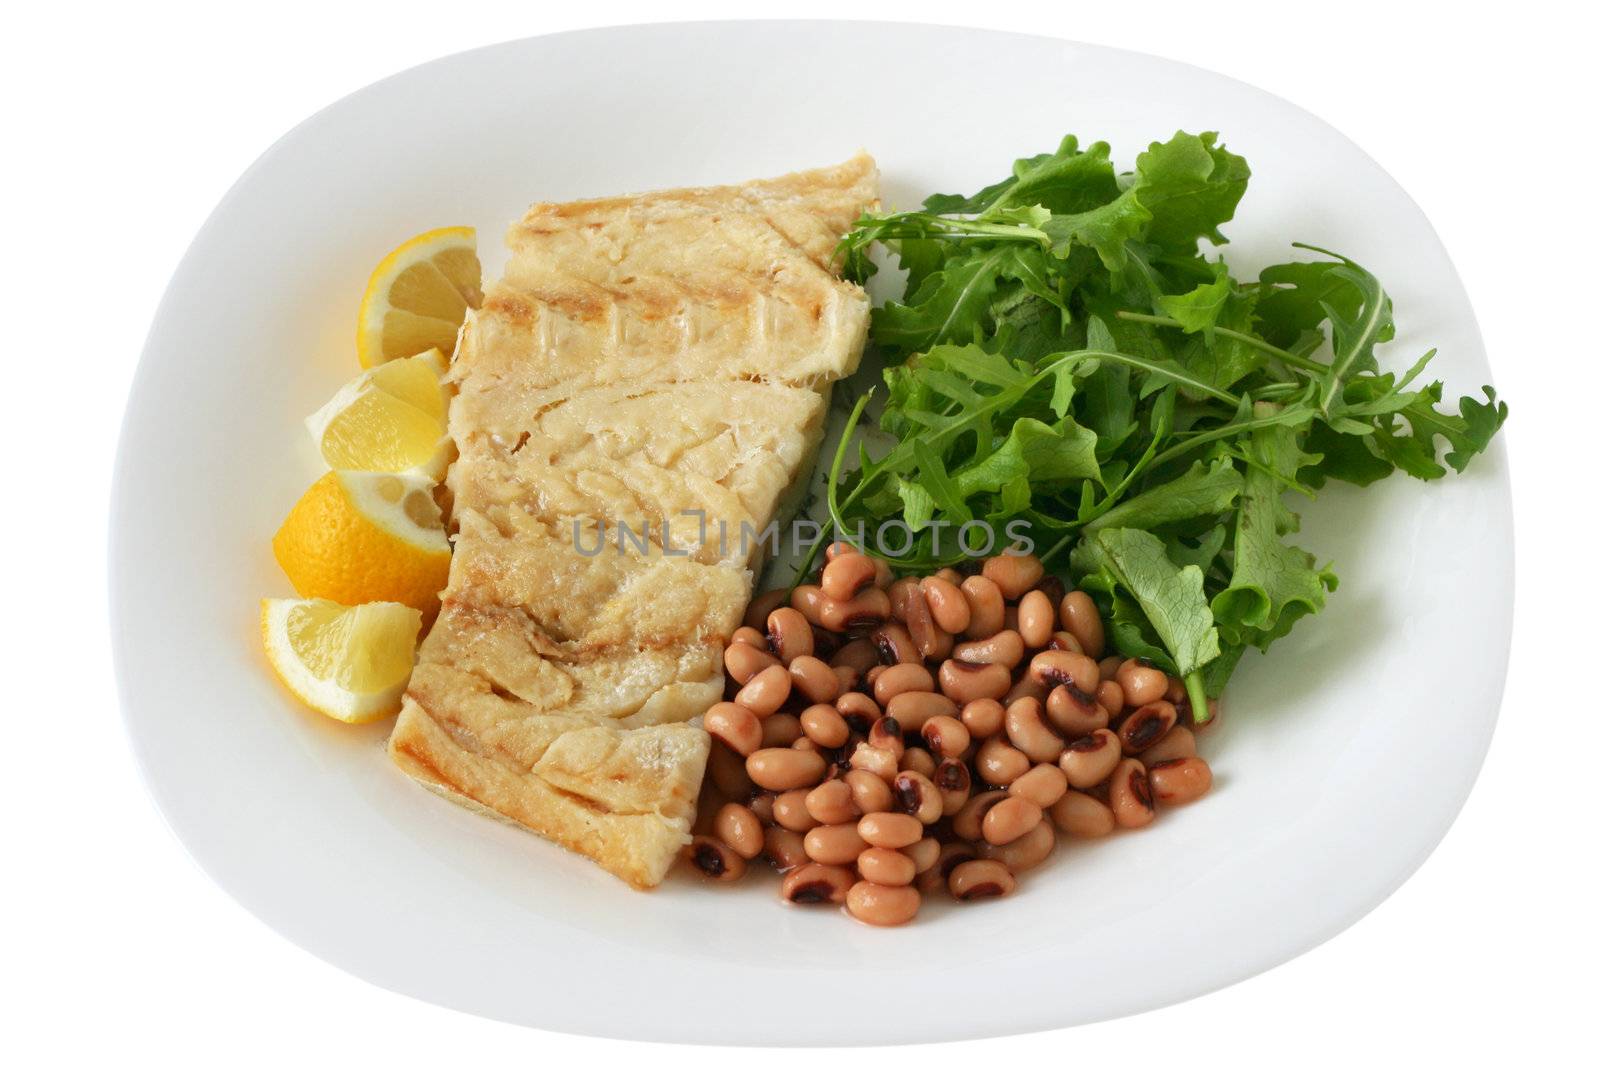 boiled codfish with beans and salad